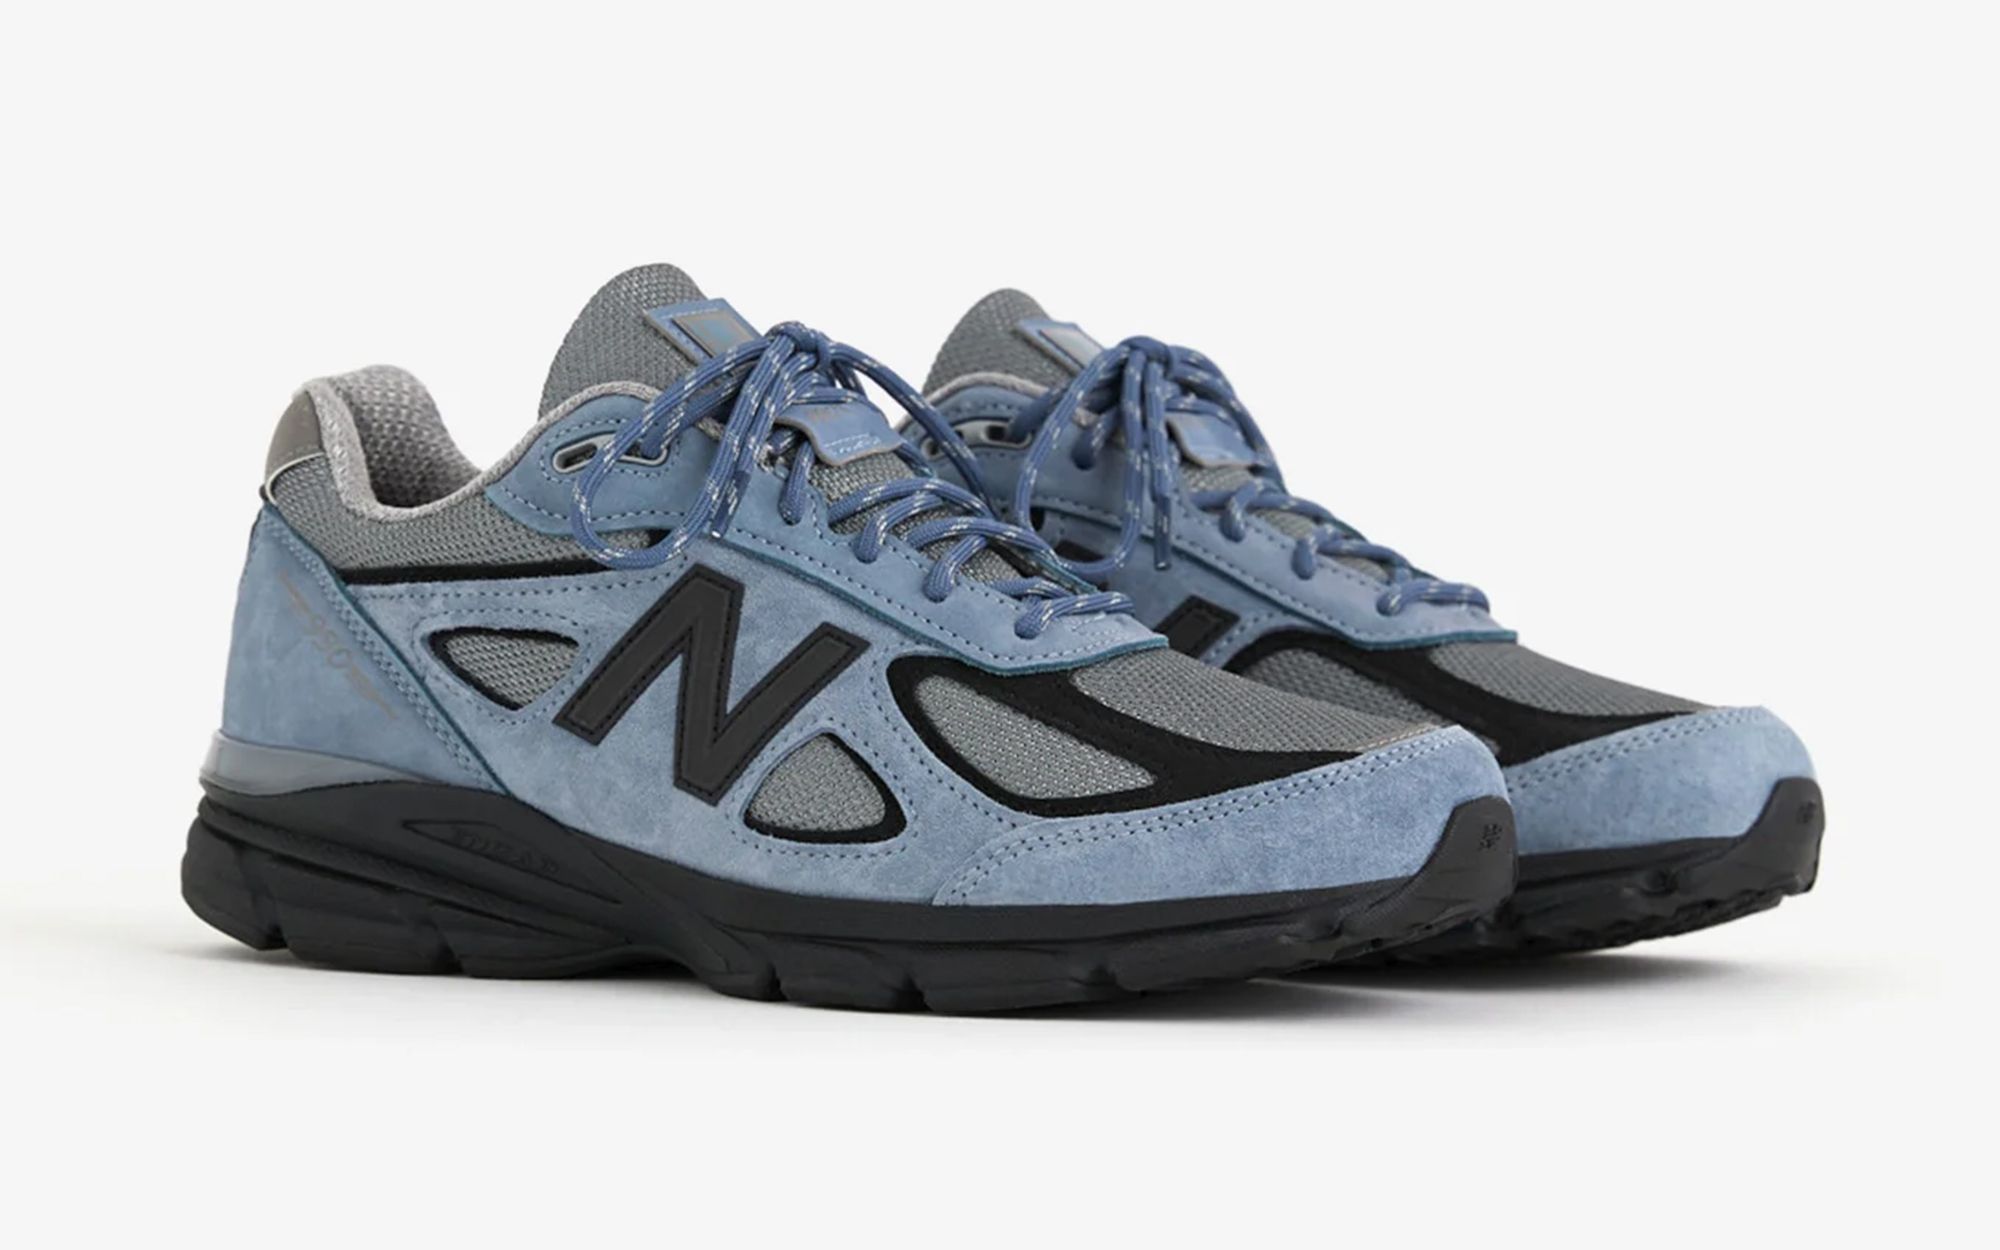 The New Balance 990v4 Arctic Grey Releases March 28 | House of Heat°